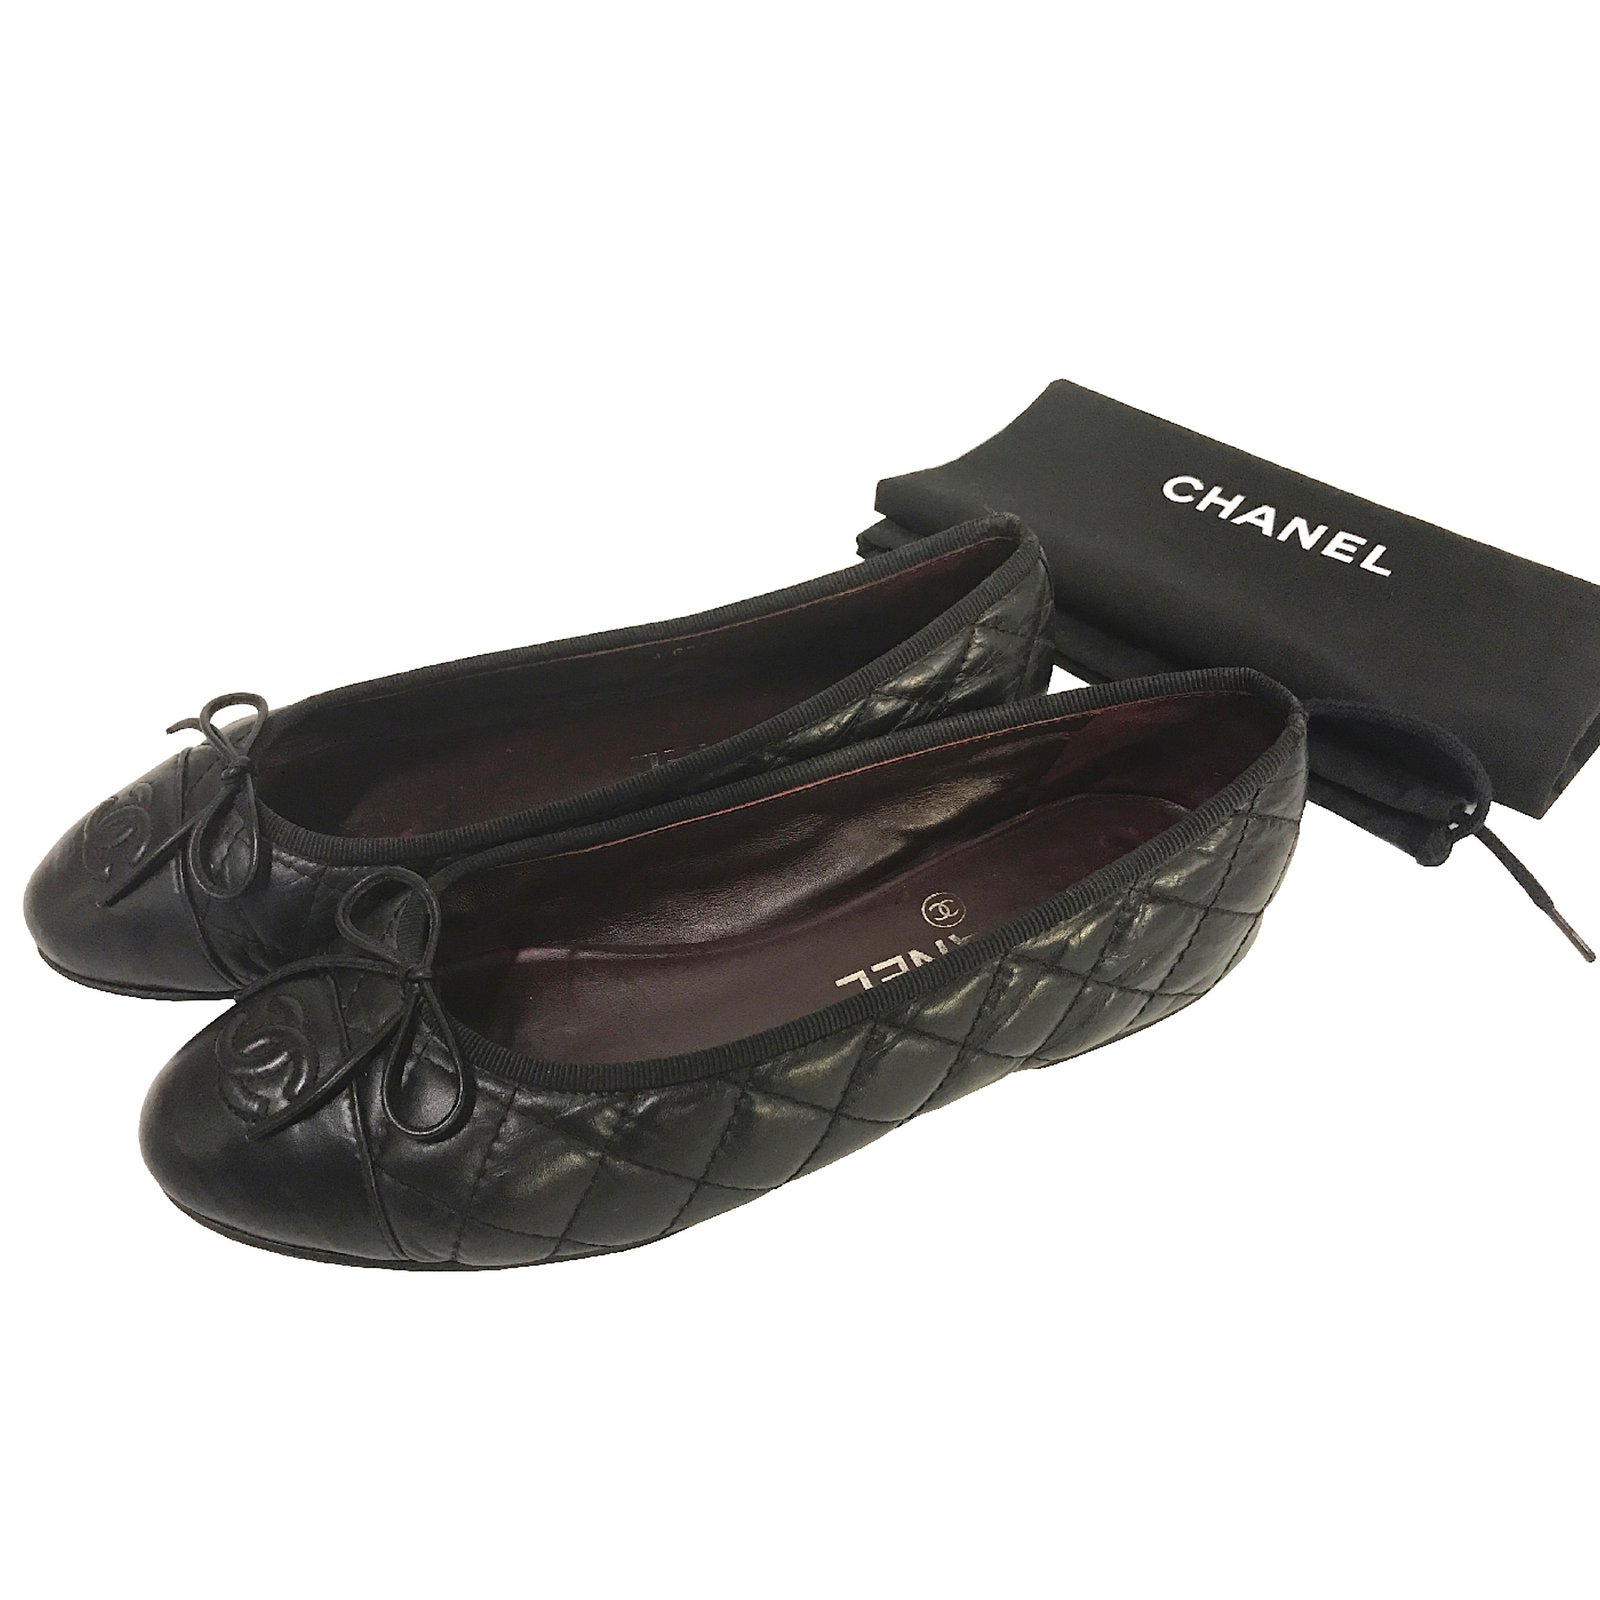 Chanel Black Quilted Cap Toe Ballet Flats at Jill's Consignment